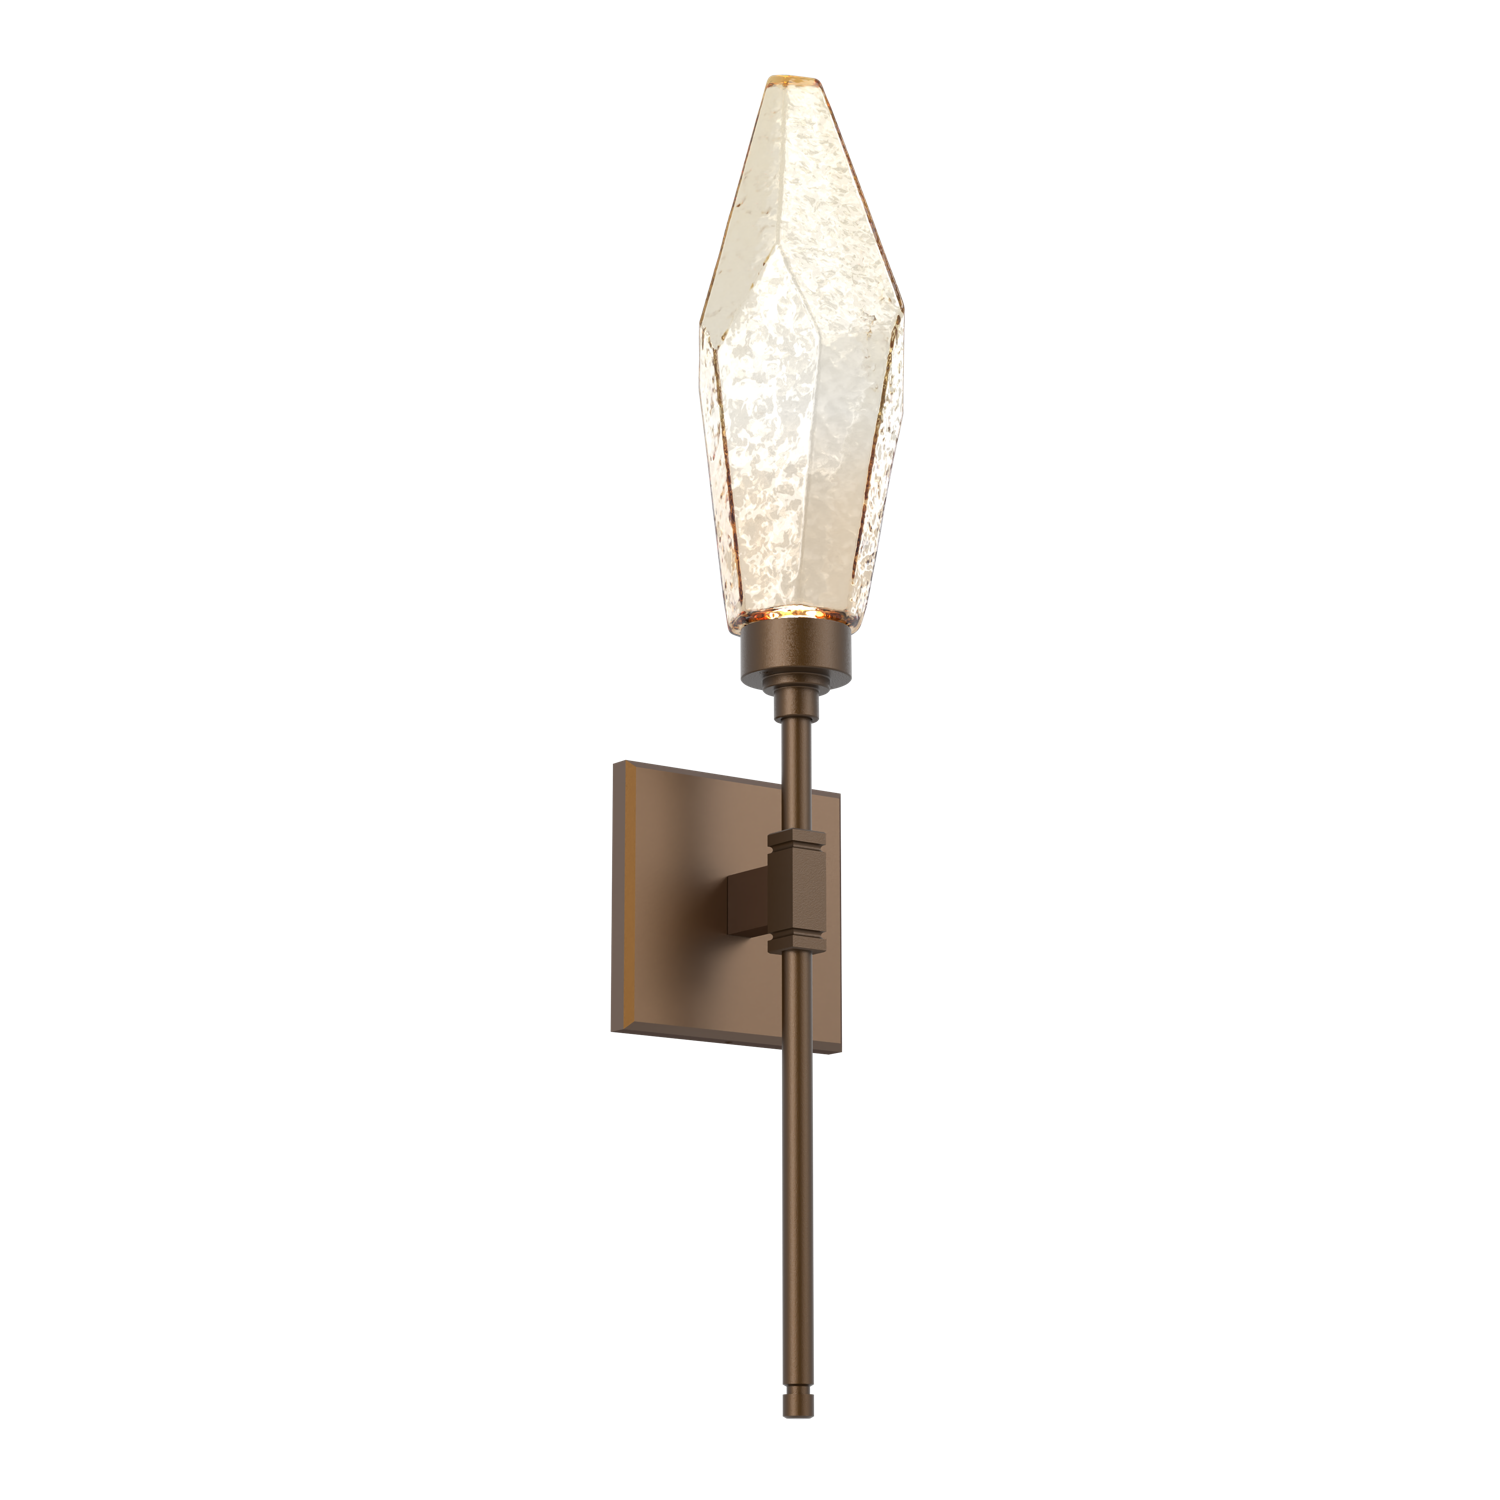 IDB0050-04-FB-CA-Hammerton-Studio-Rock-Crystal-ada-certified-belvedere-wall-sconce-with-flat-bronze-finish-and-chilled-amber-blown-glass-shades-and-LED-lamping